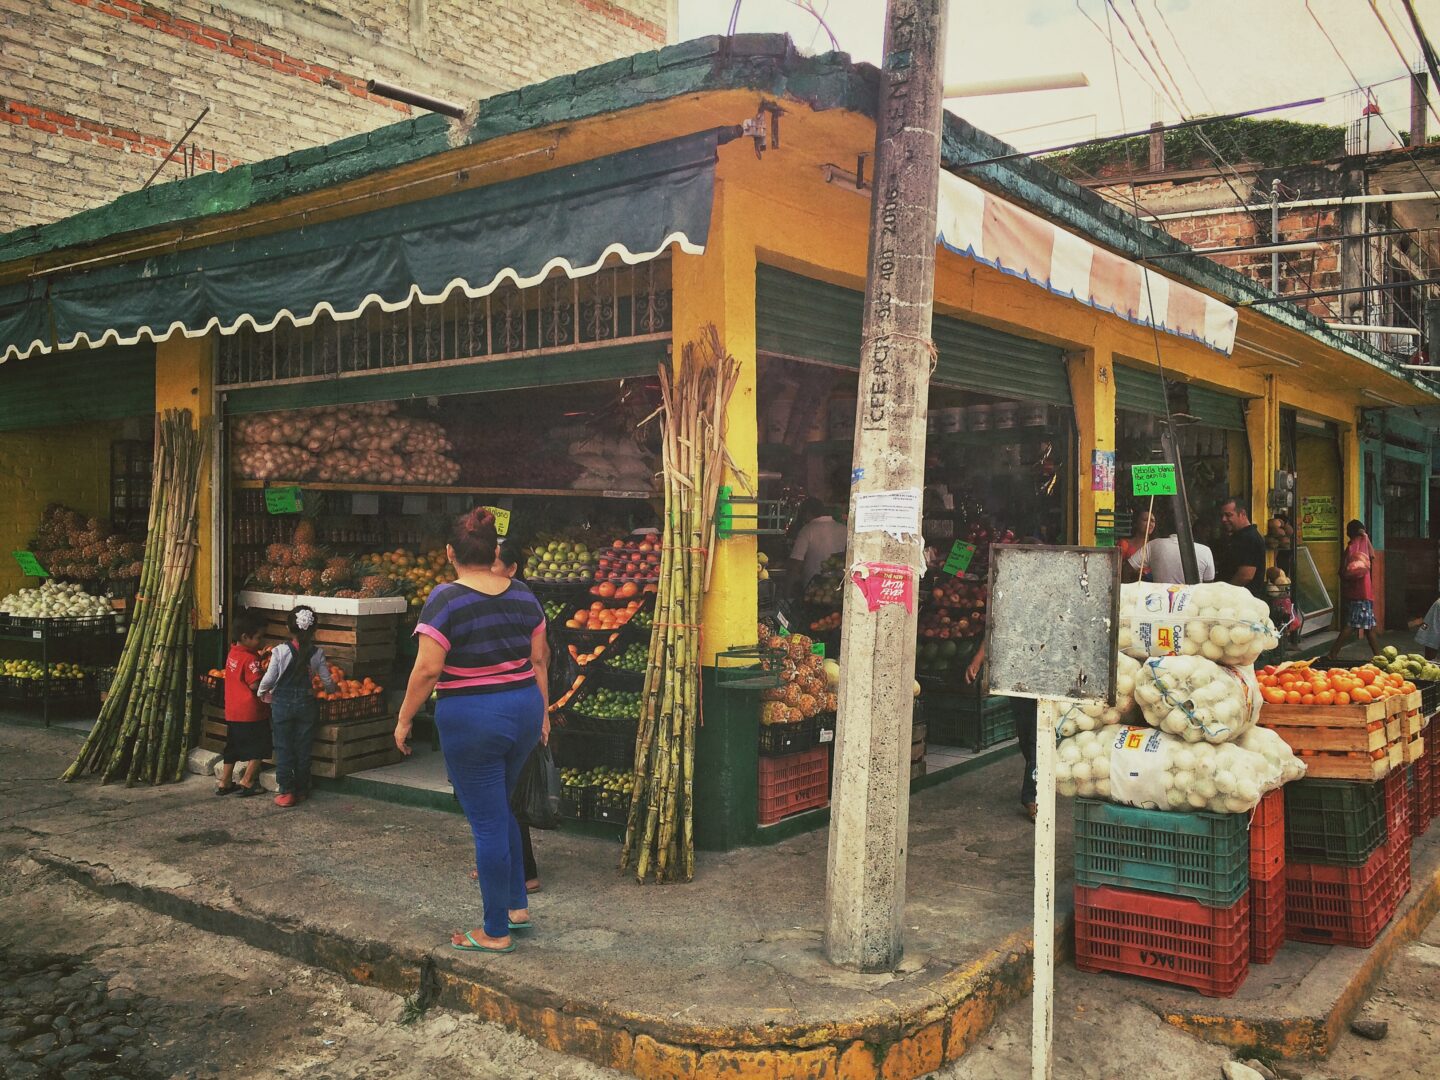 A woman walking past a fruit and vegetable stand.